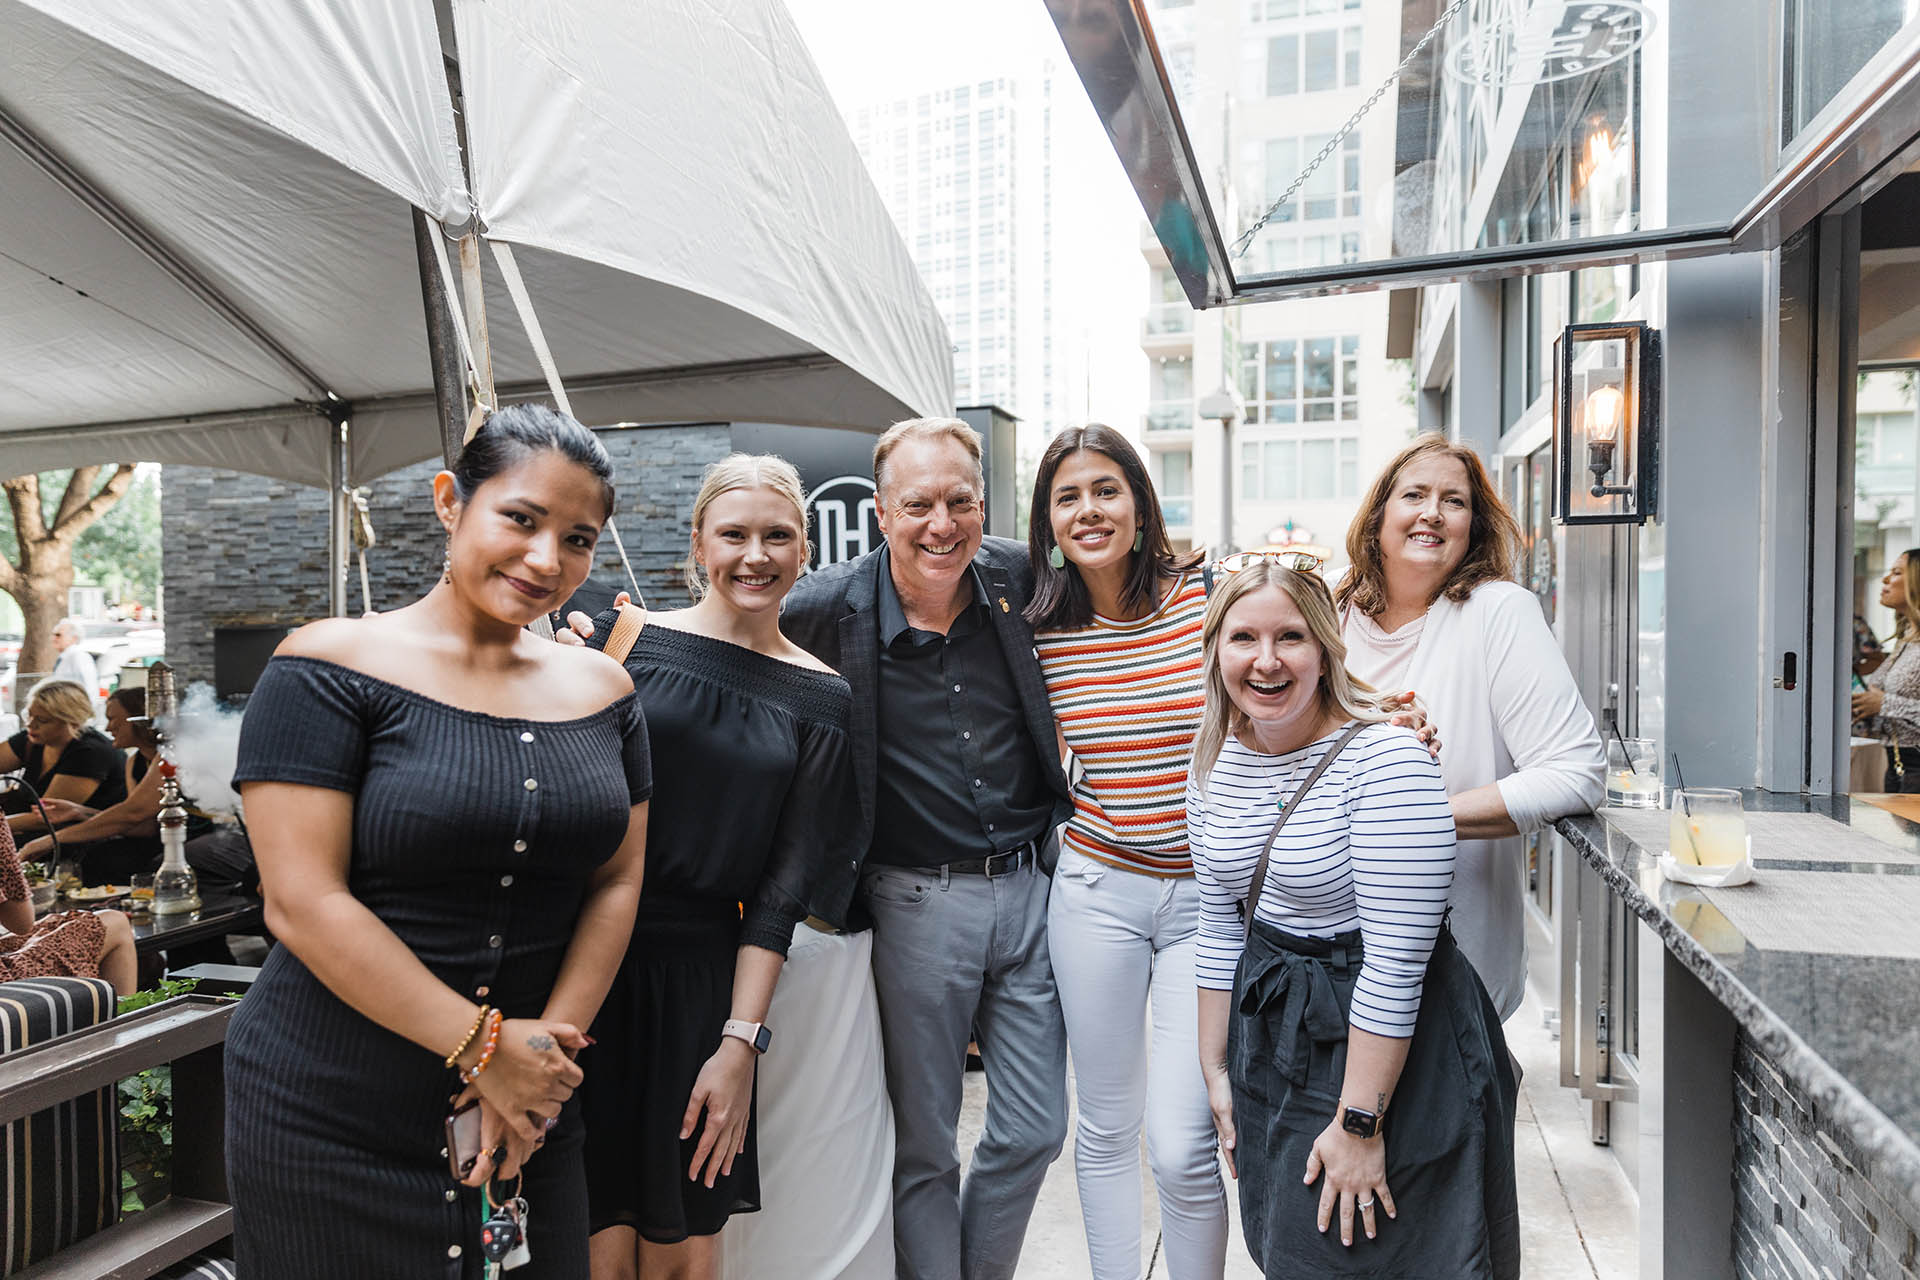 Corporate group photography of five women and one man casually smiling and posing together at an outdoor event in Fort Worth.